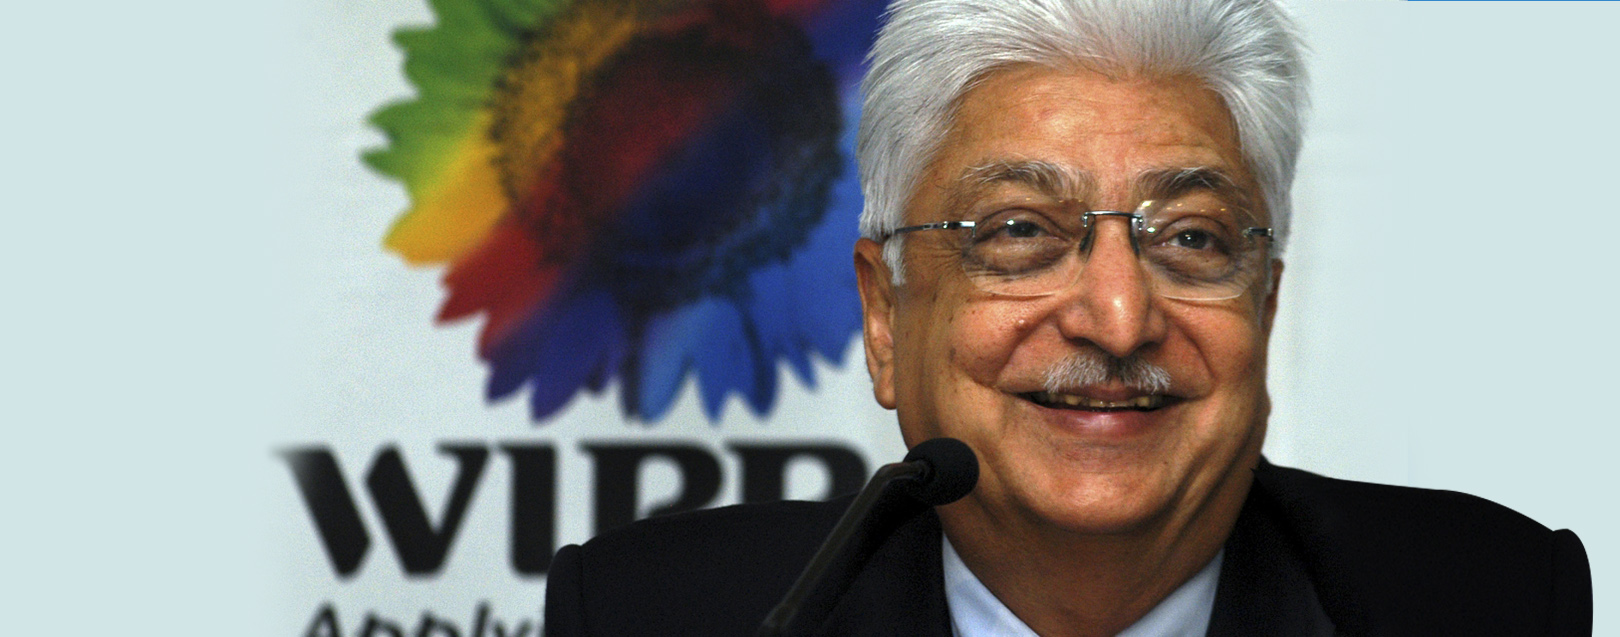 Wipro’s Premji meets IT minister over proposed H1B curbs